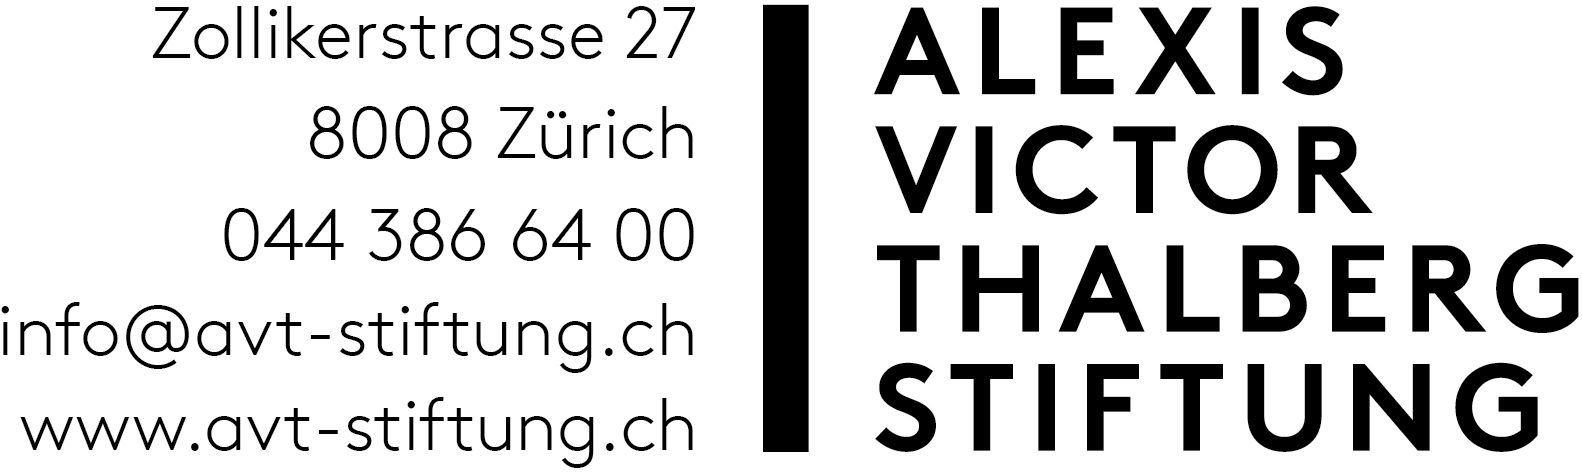 Alexis Victor Thalberg Stiftung